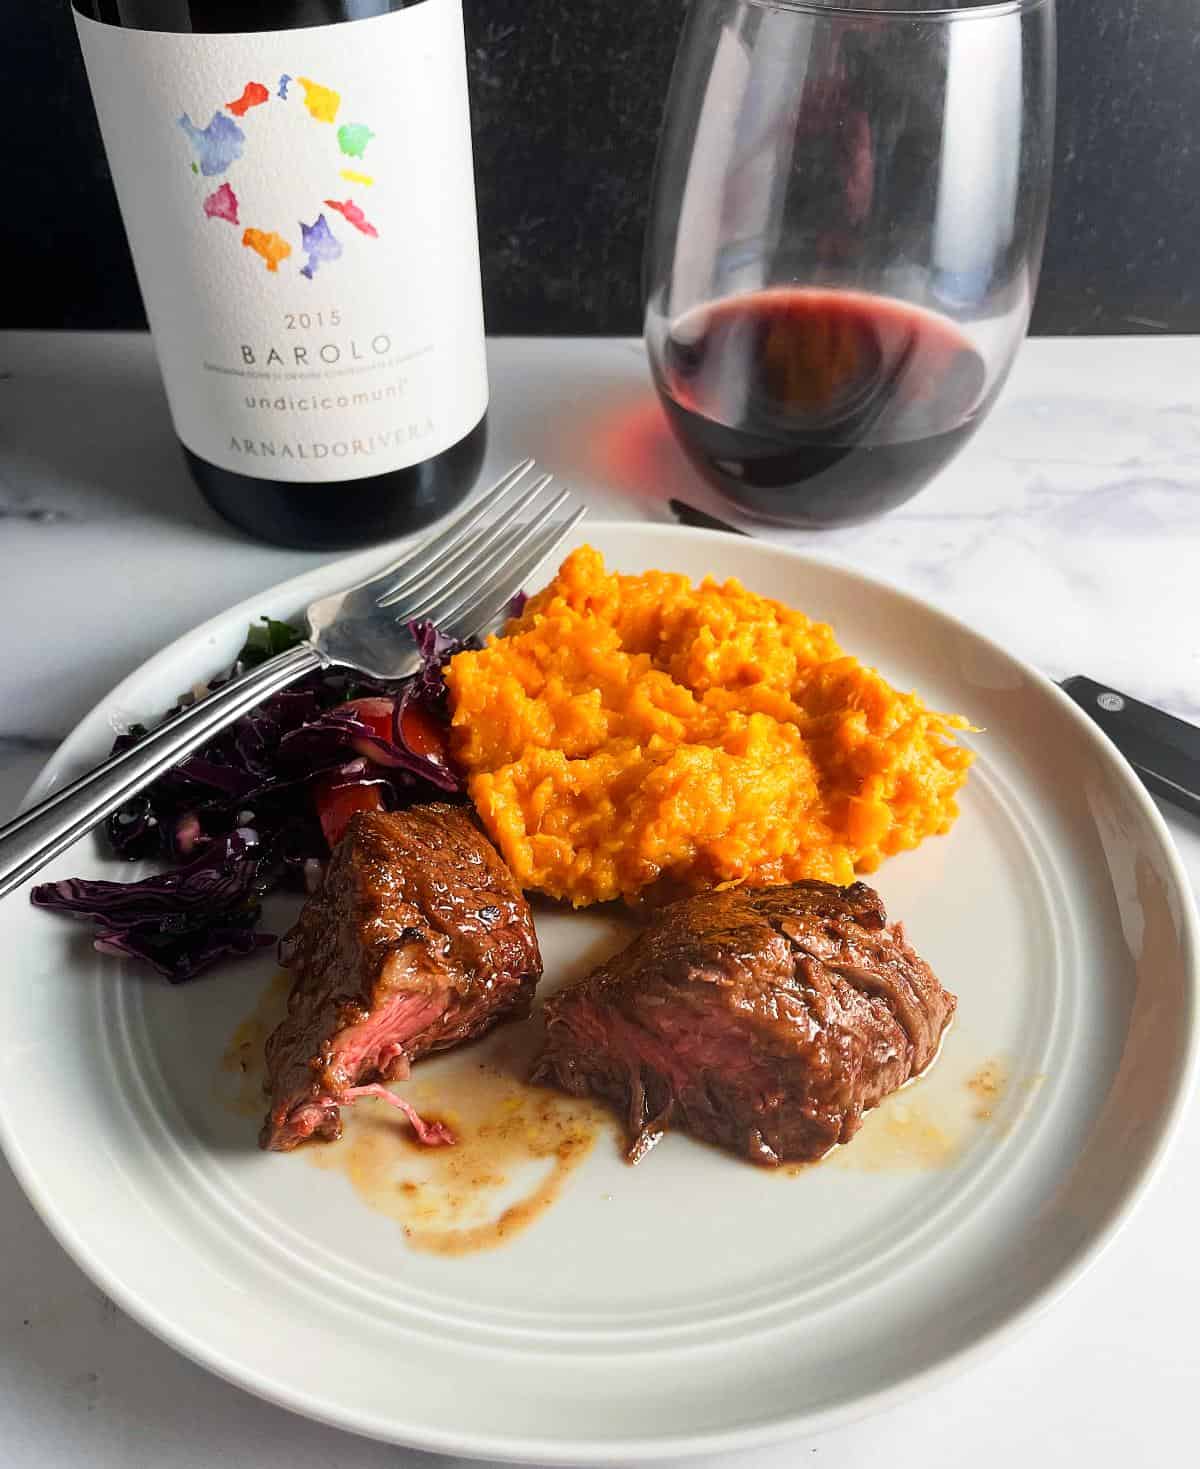 steak tips plated with sweet potatoes and red cabbage salad, with a red wine in the background.